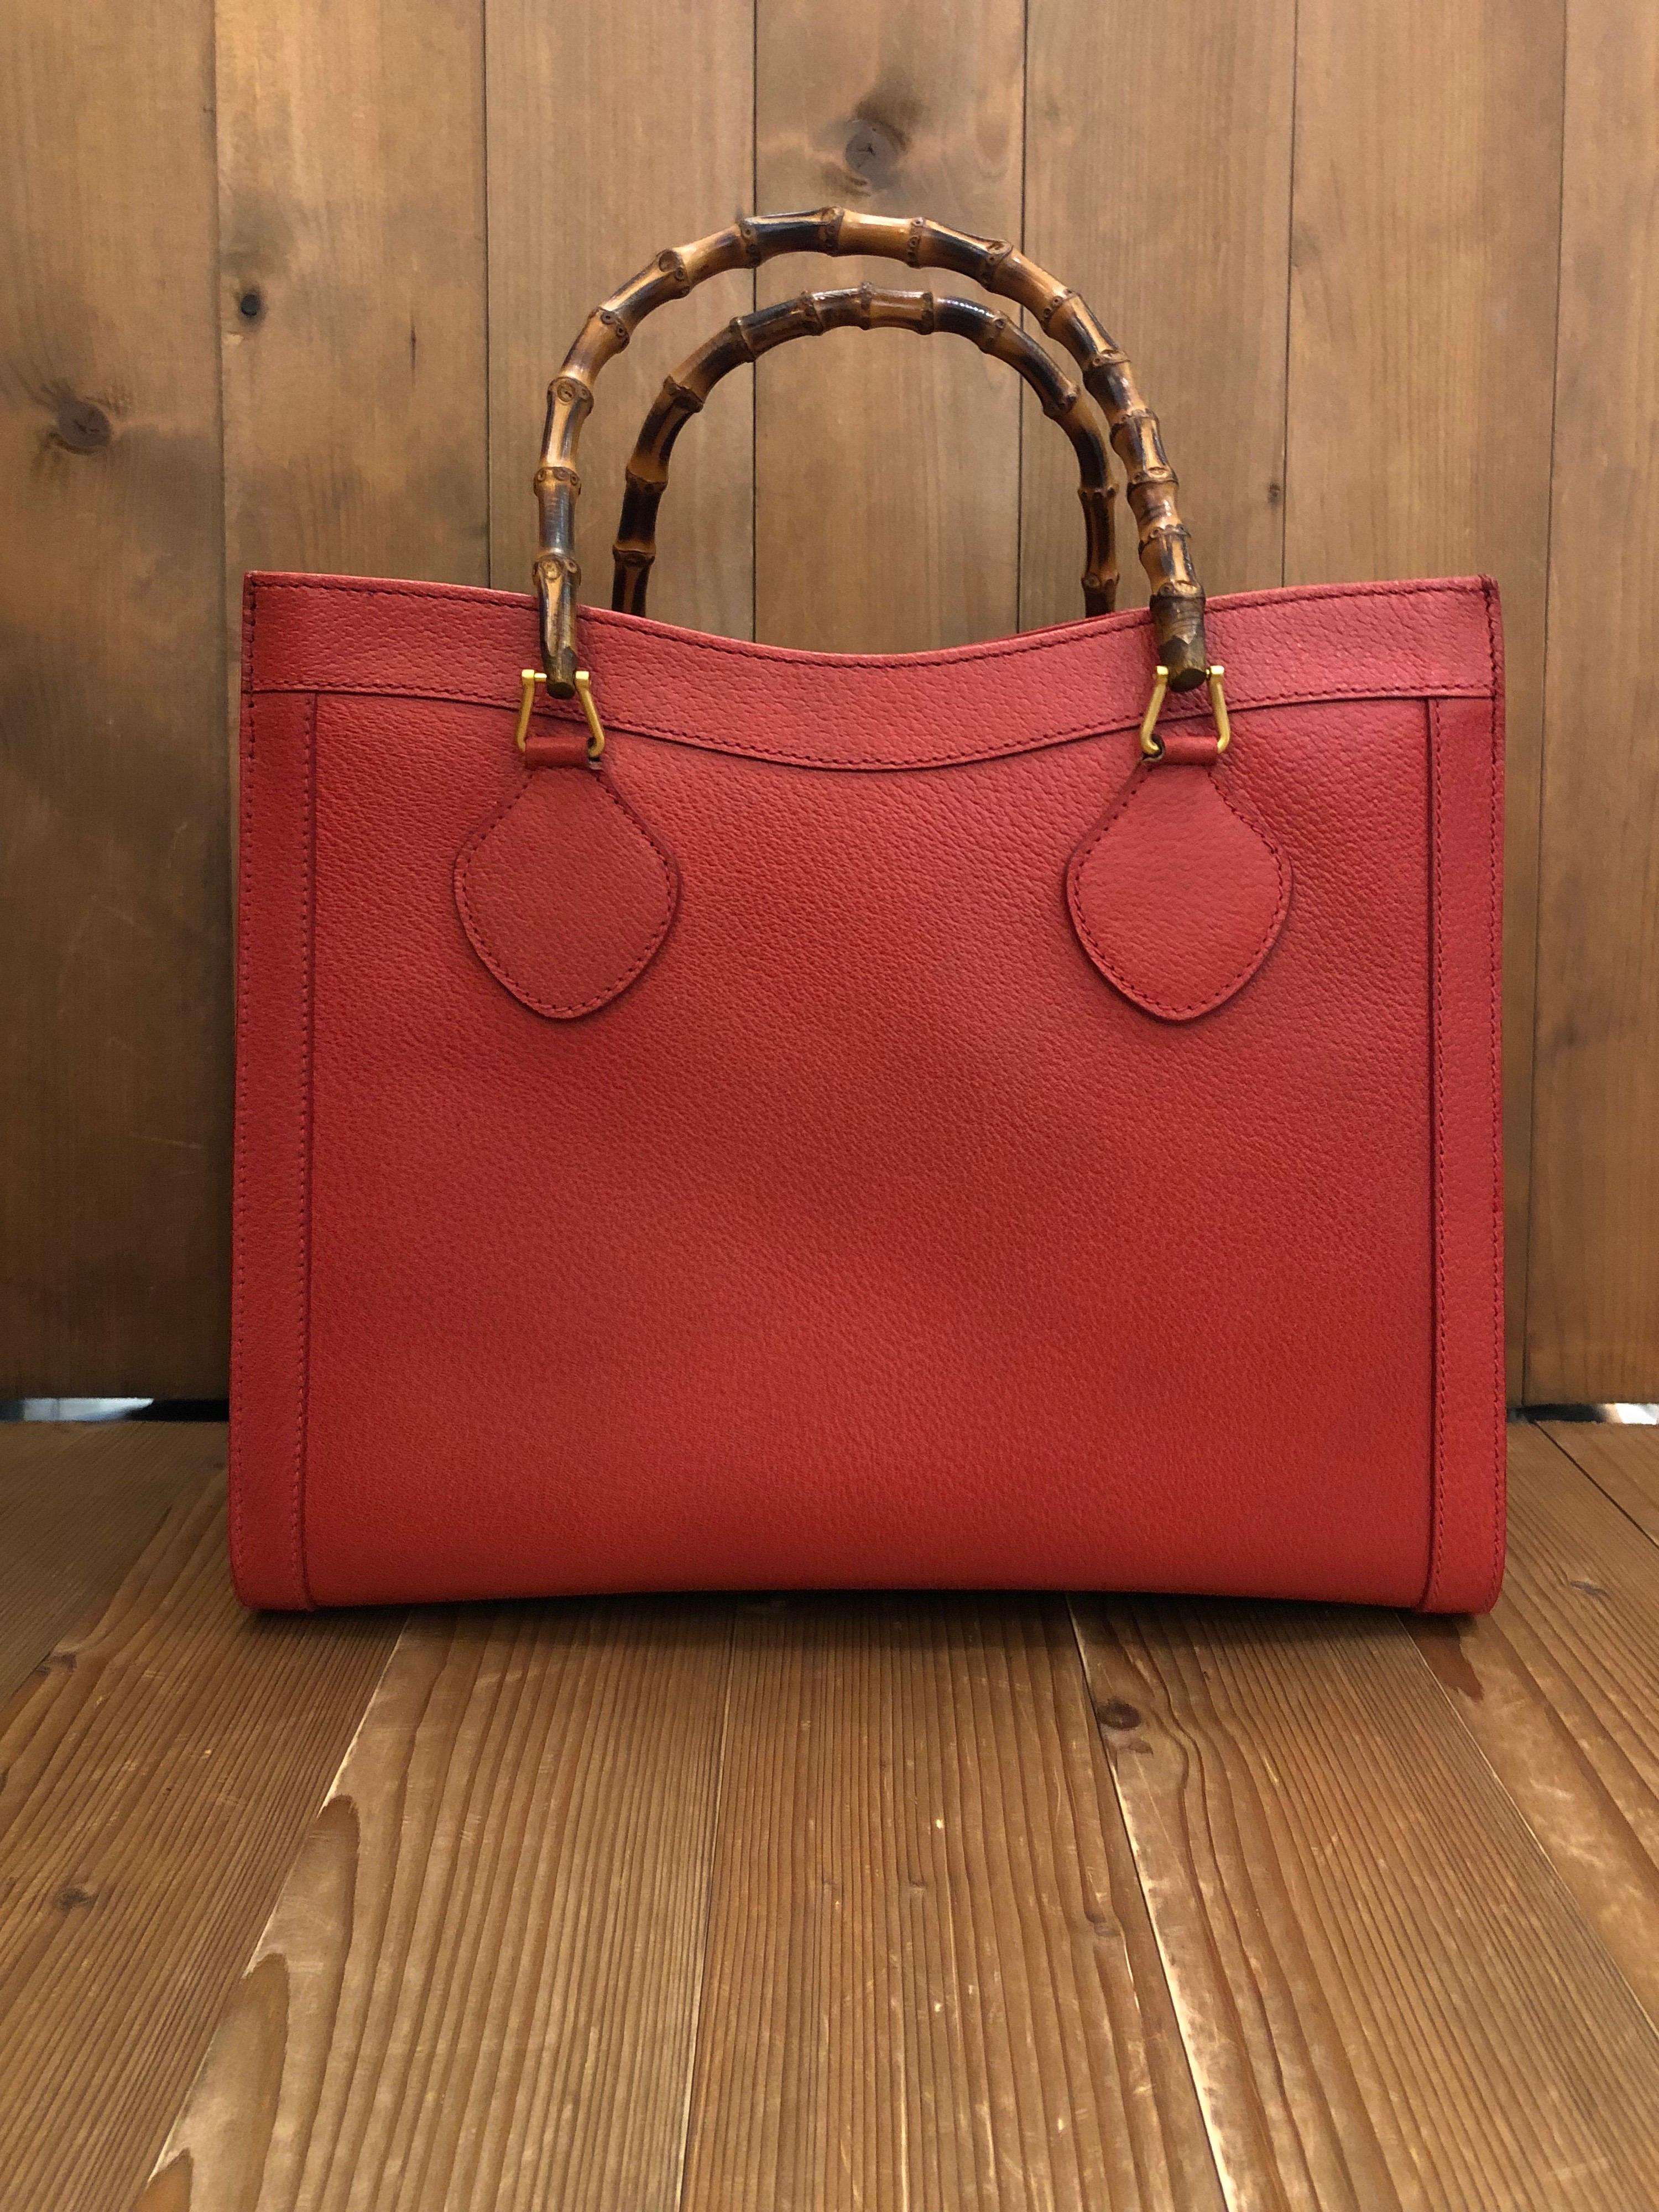 1990s Gucci bamboo tote in red leather. The Bamboo tote is one of Princess Diana's favorite purses. Gucci revamped this Bamboo tote in 2021 winter collection. Made in Italy. Measures 13 x 11 x 5.5 inches handle drop 5 inches. It features two main